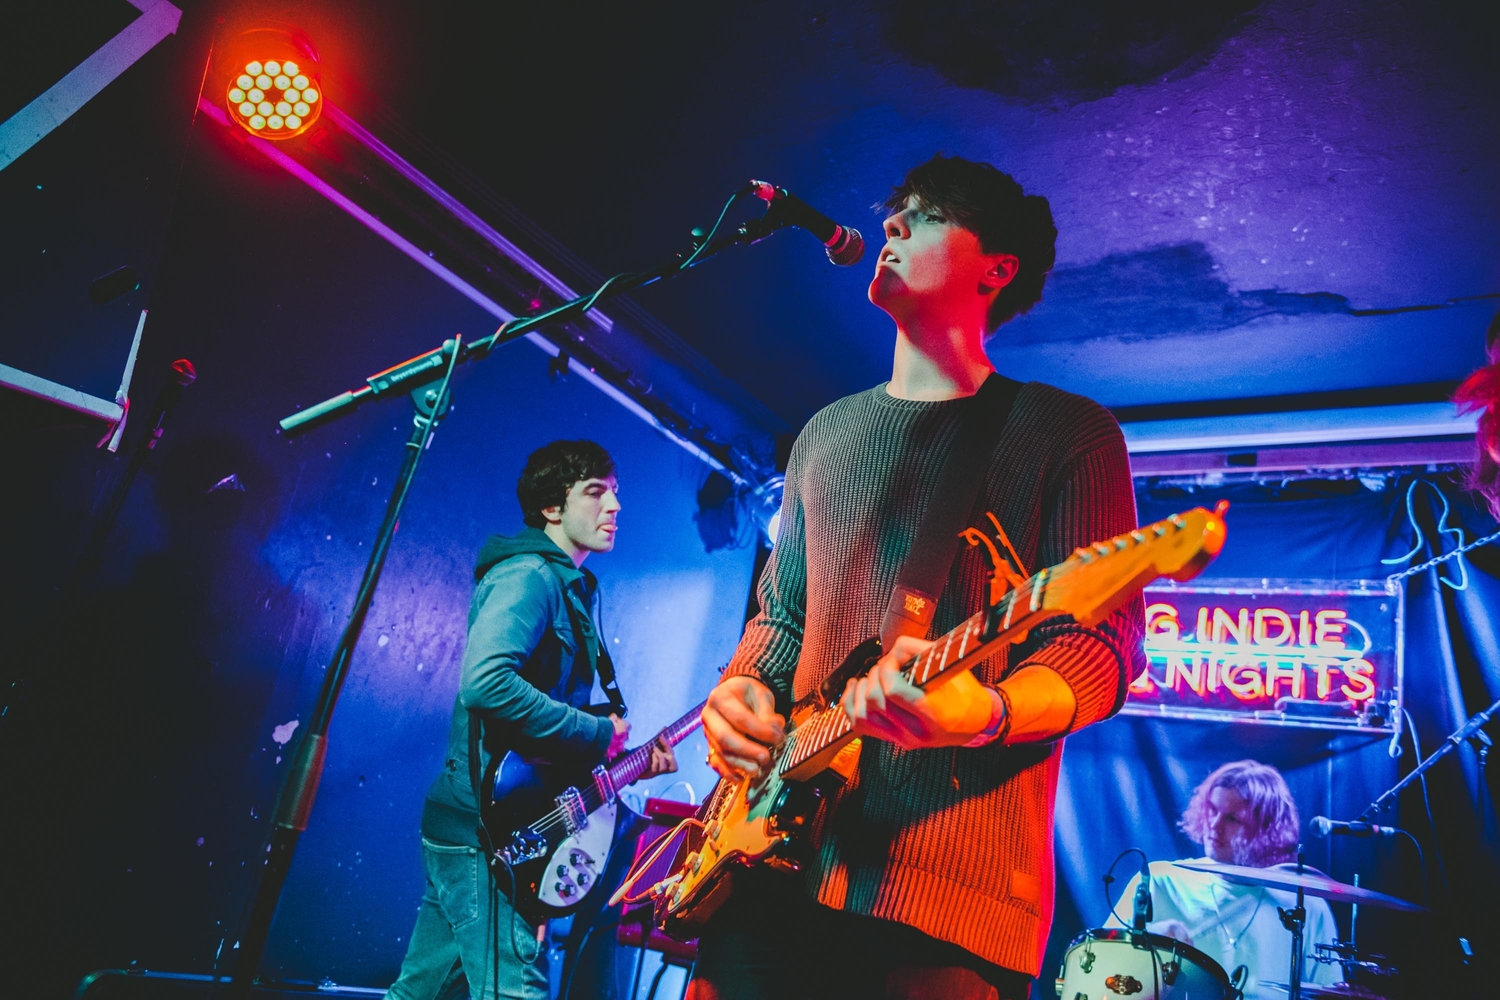 Big Indie Big Nights hits The Old Blue Last for festive celebrations